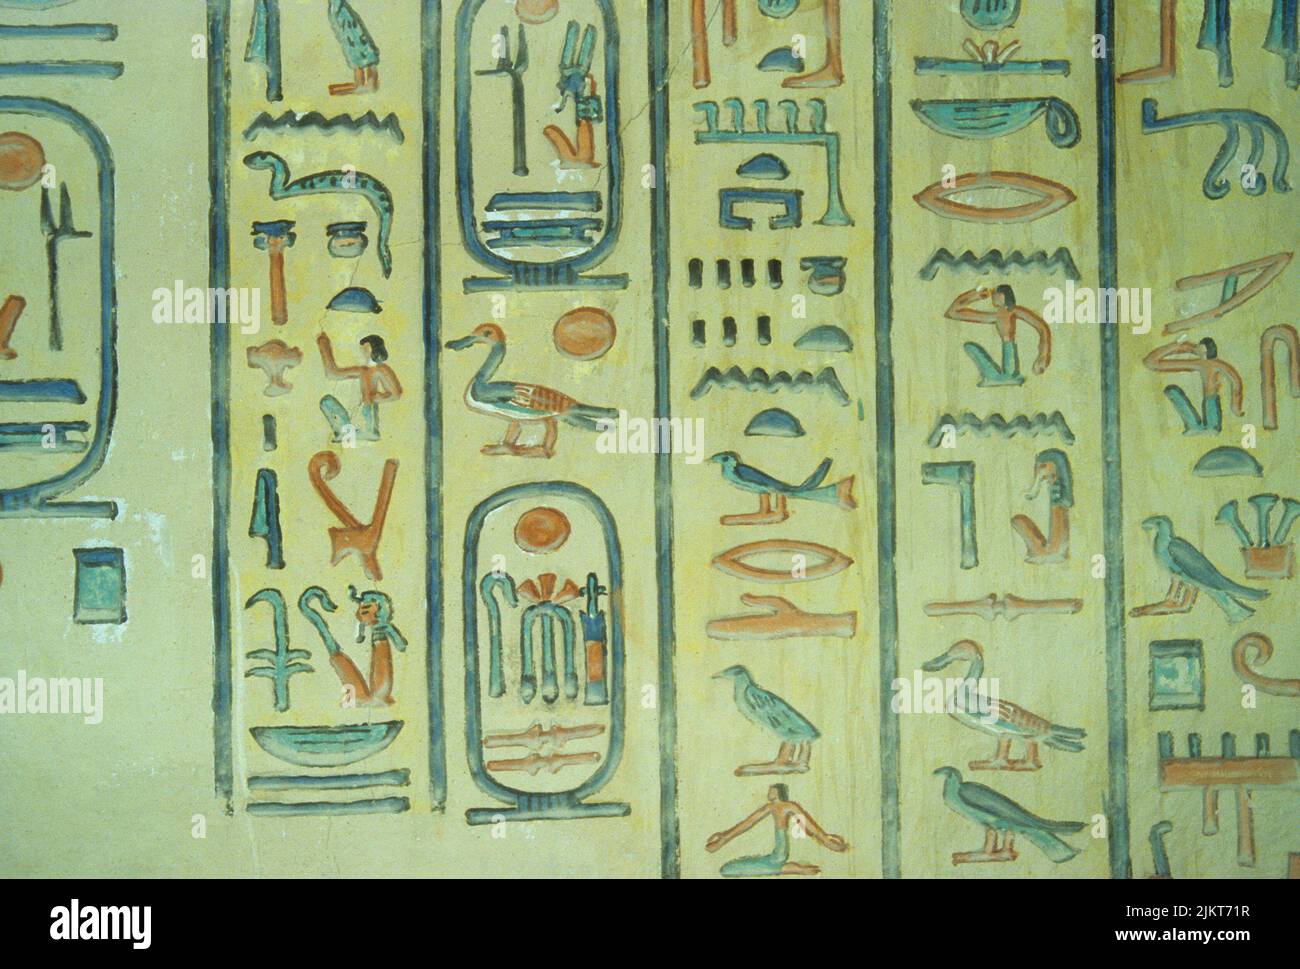 Frescoes showing hieroglyphes on the interior wall of Queen Amenherkhepshefs tomb in the Valley of the Queens, near Luxor, Egypt. Stock Photo